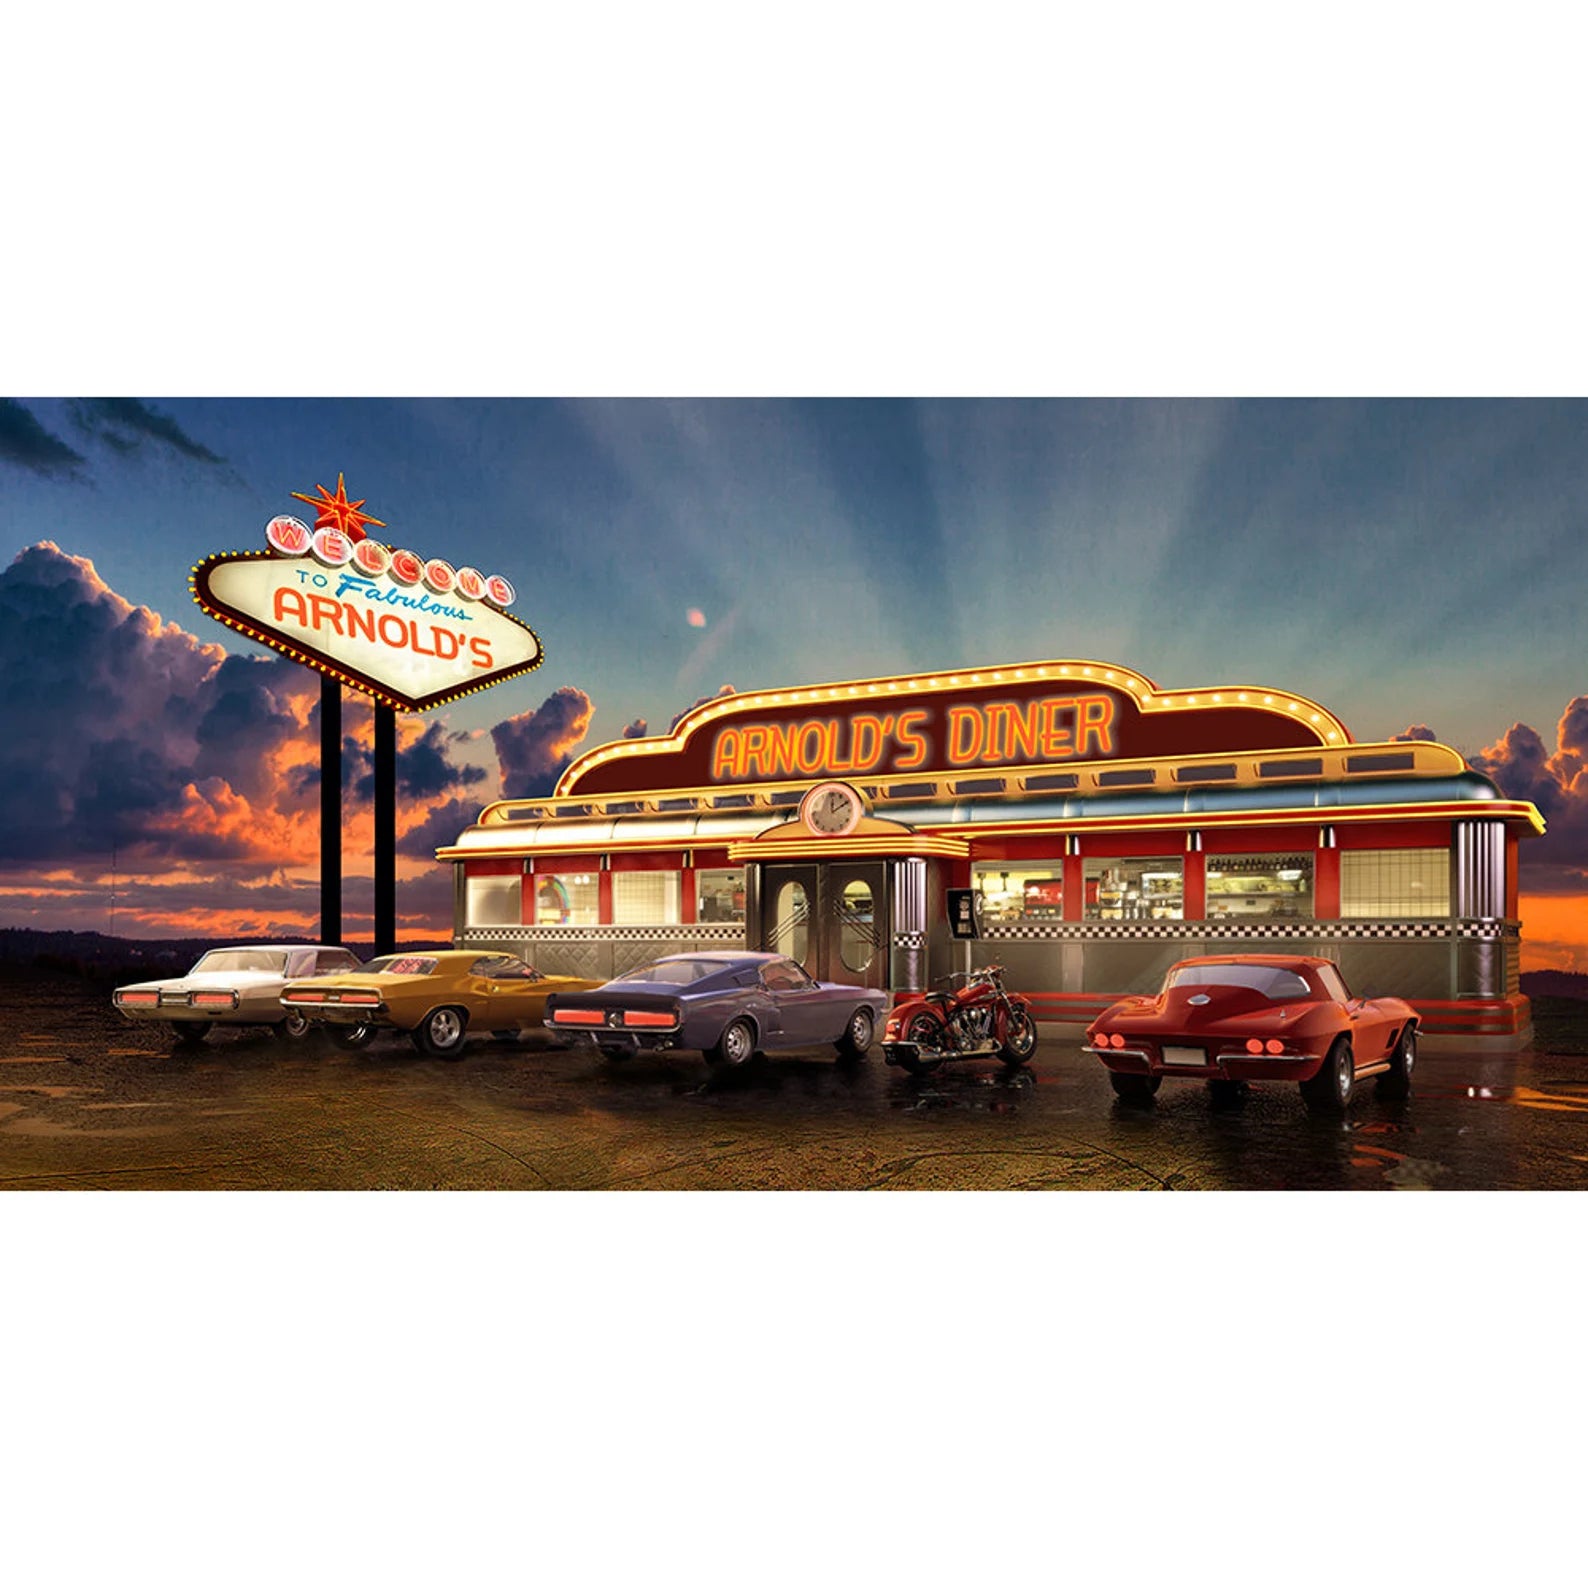 Blue 57 Chevy Diner Photo Backdrop - Basic 16  x 8  